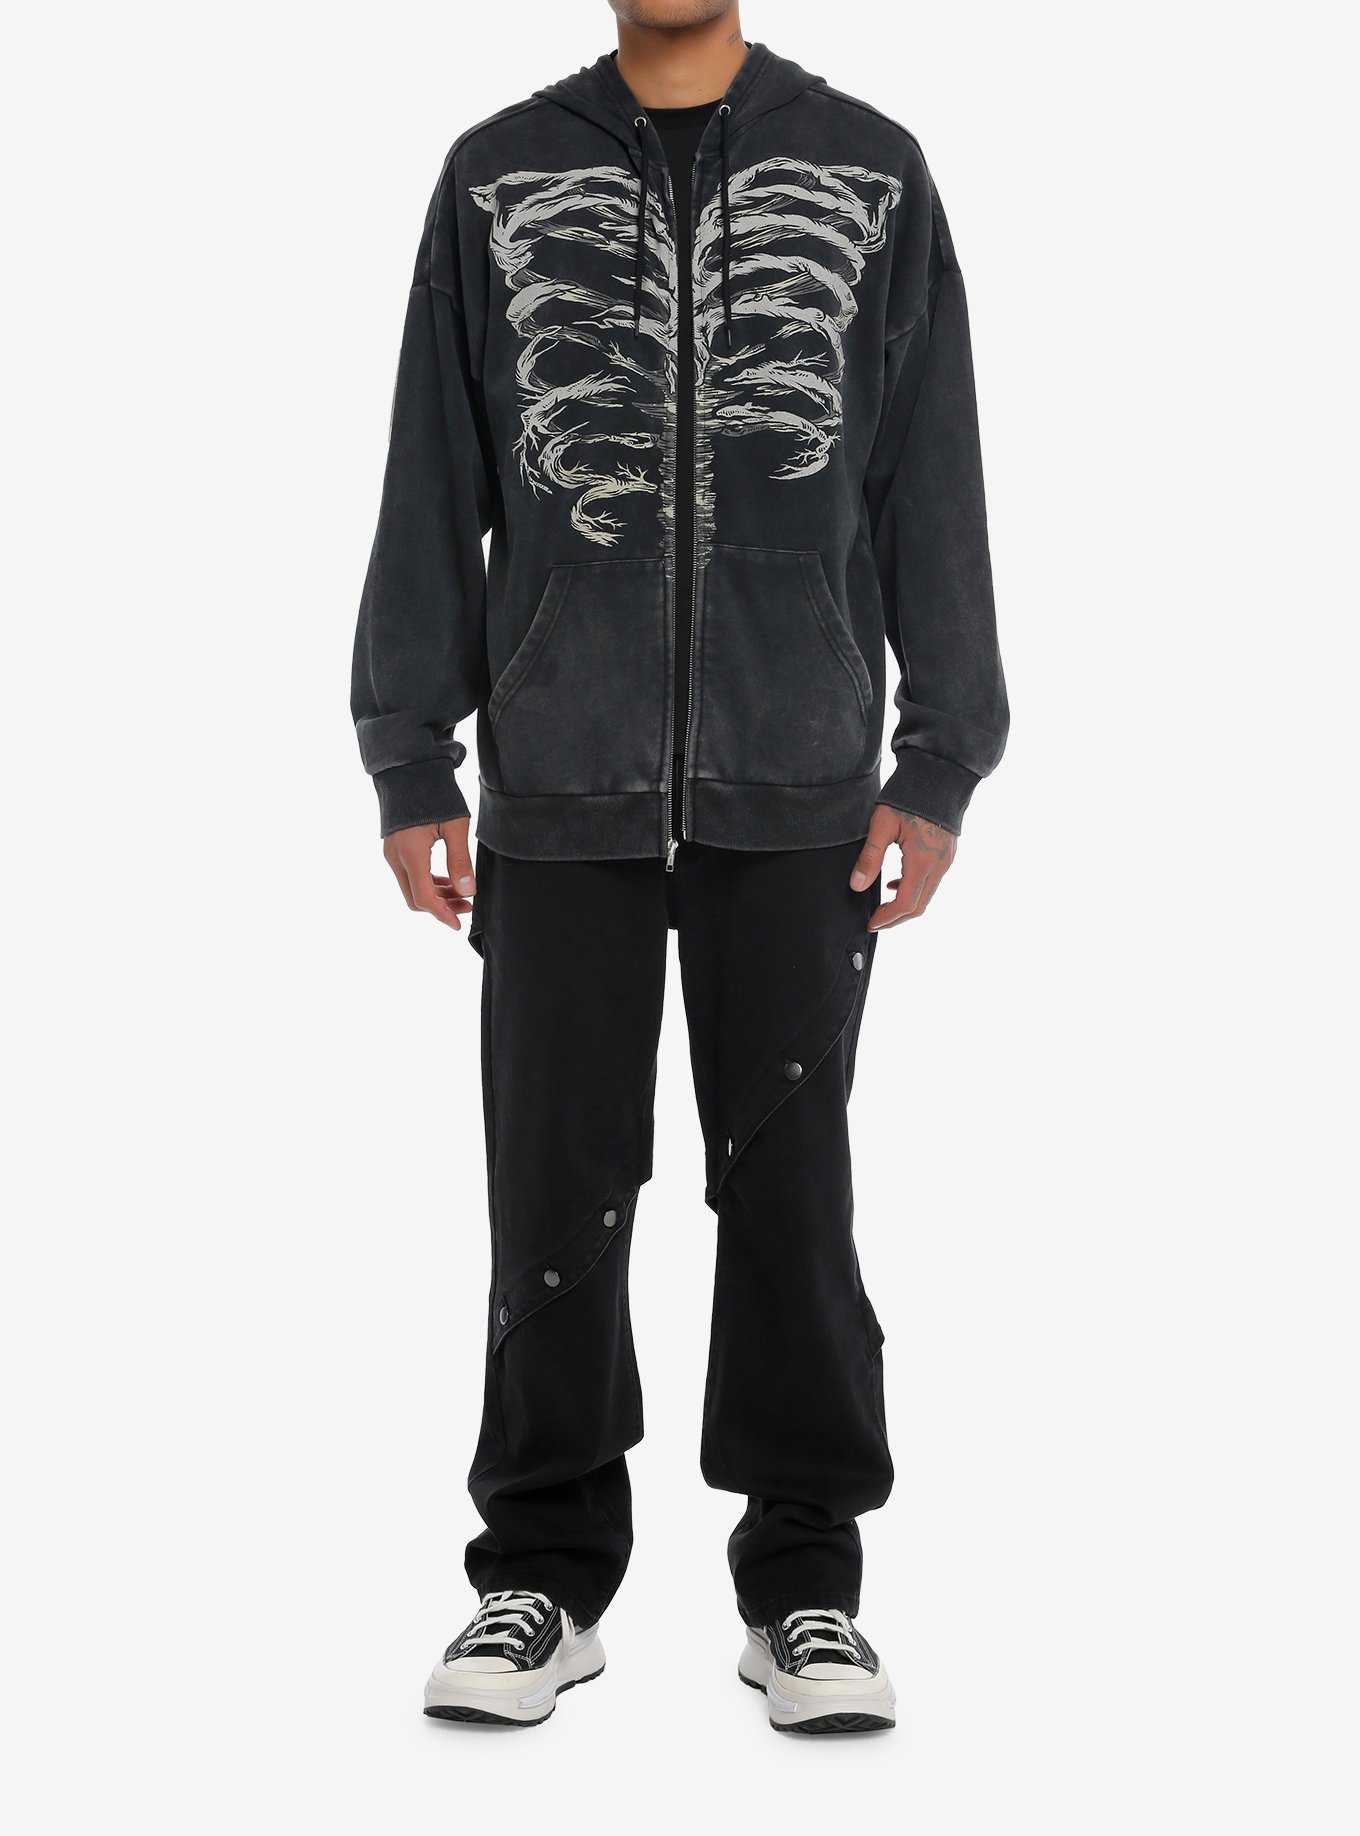 Rib Cage Illustrated Oversized Hoodie, , hi-res